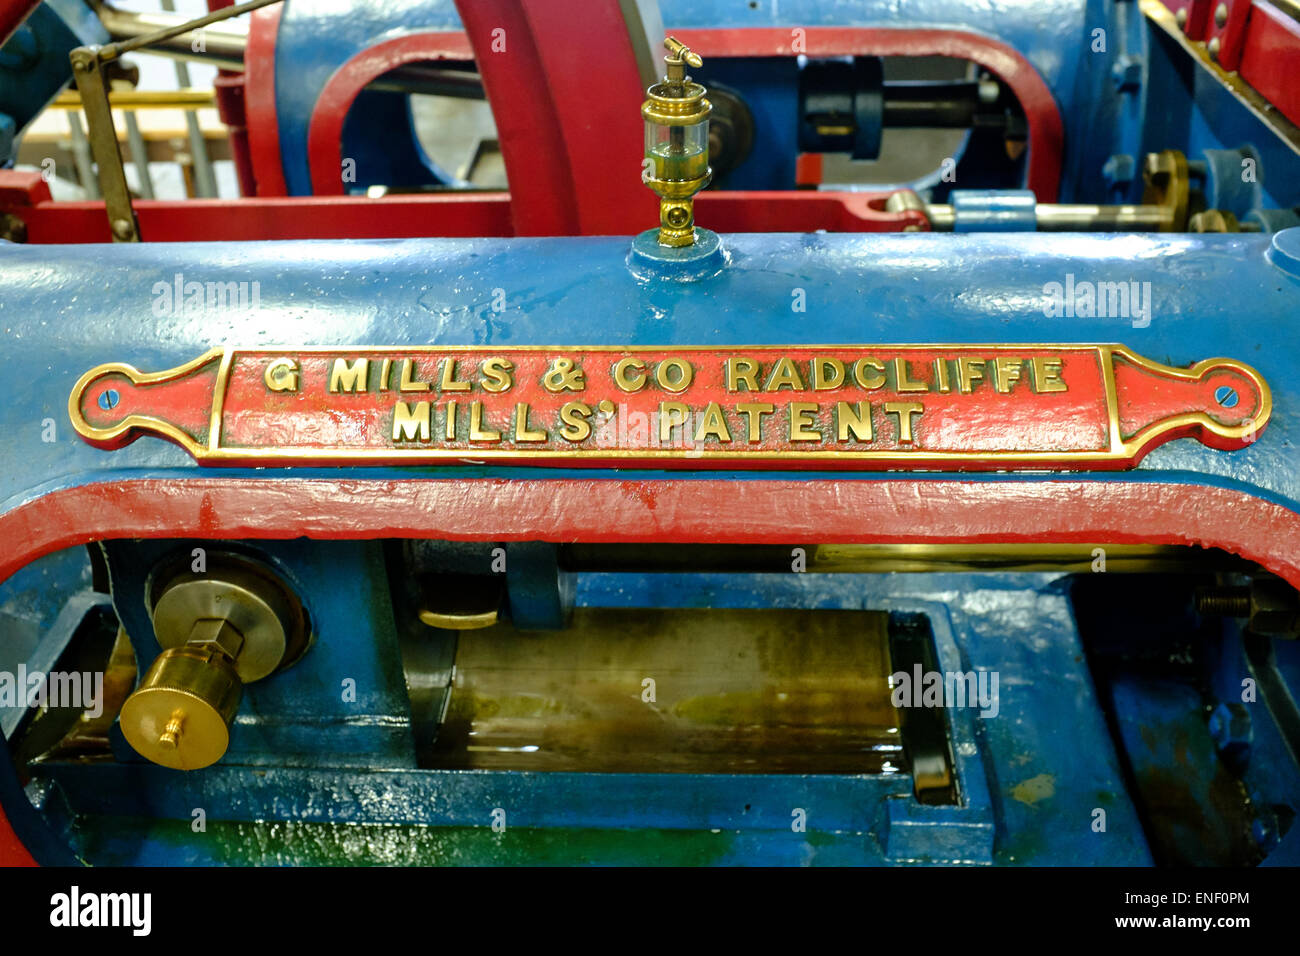 Name plate on steam engine by Mills and Co of Radcliffe, Lancashire, UK Stock Photo